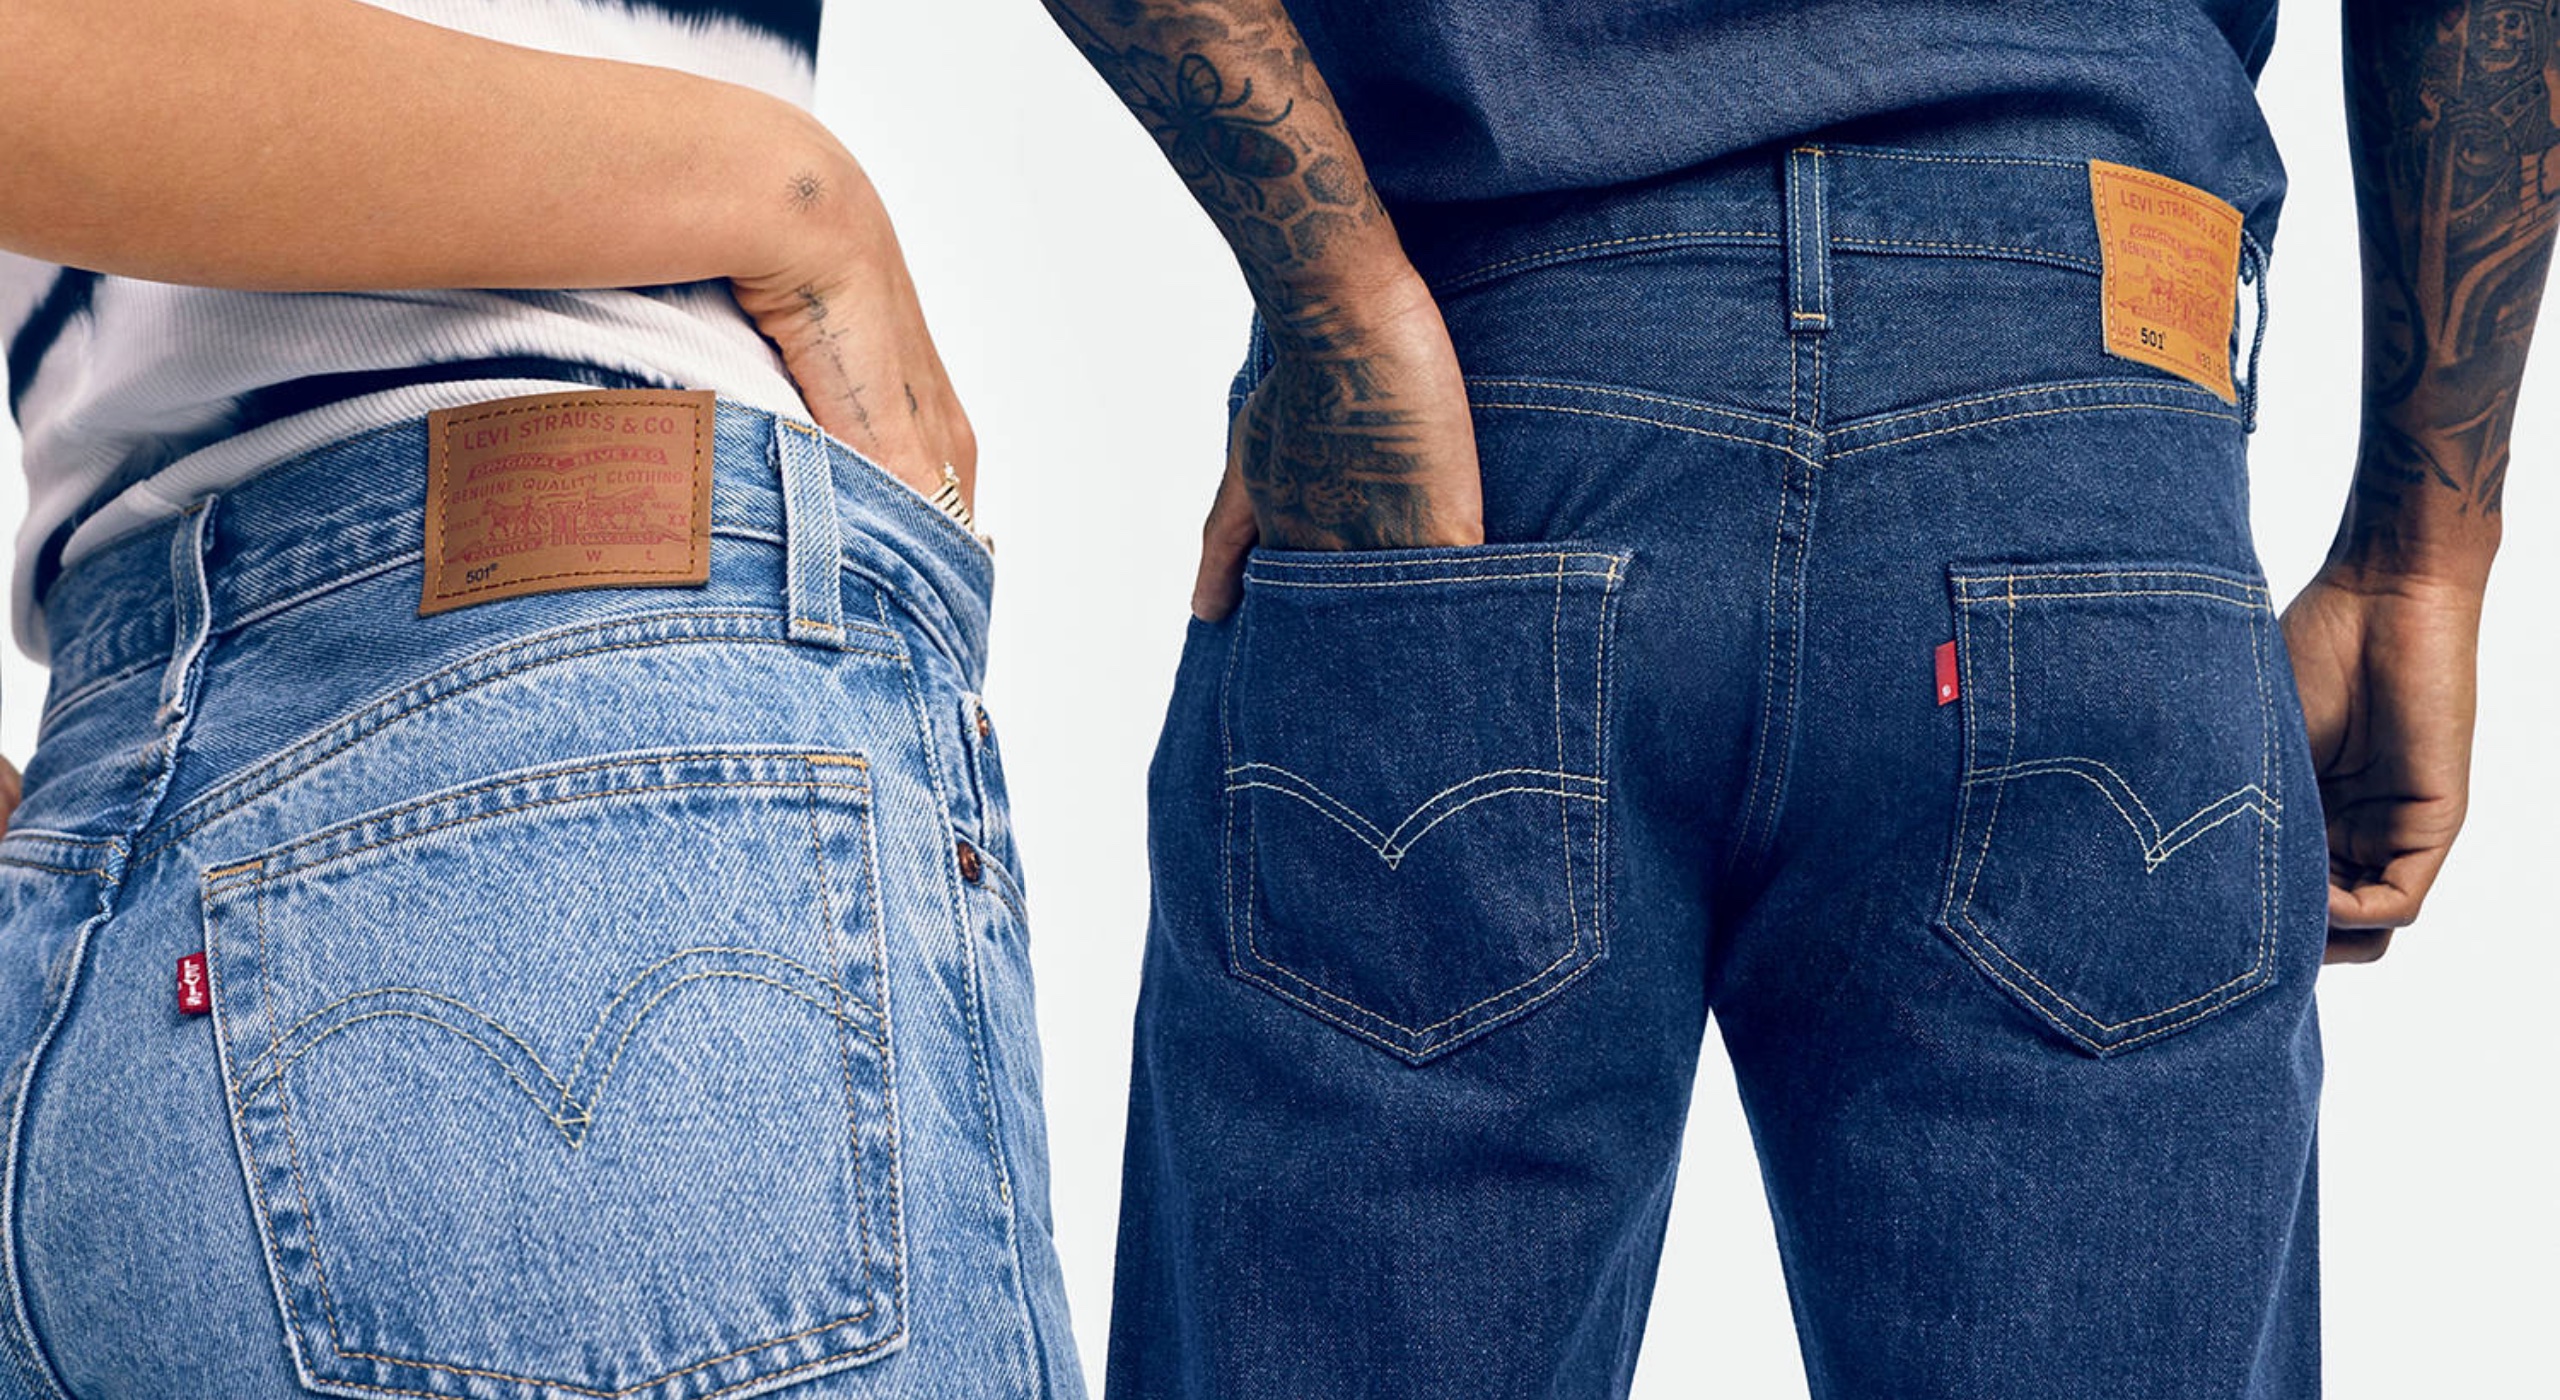 Andrew Halliday Kreta Aanzetten Levi's Friends and Family Sale offers 30% off sitewide + extra 40% off  clearance items